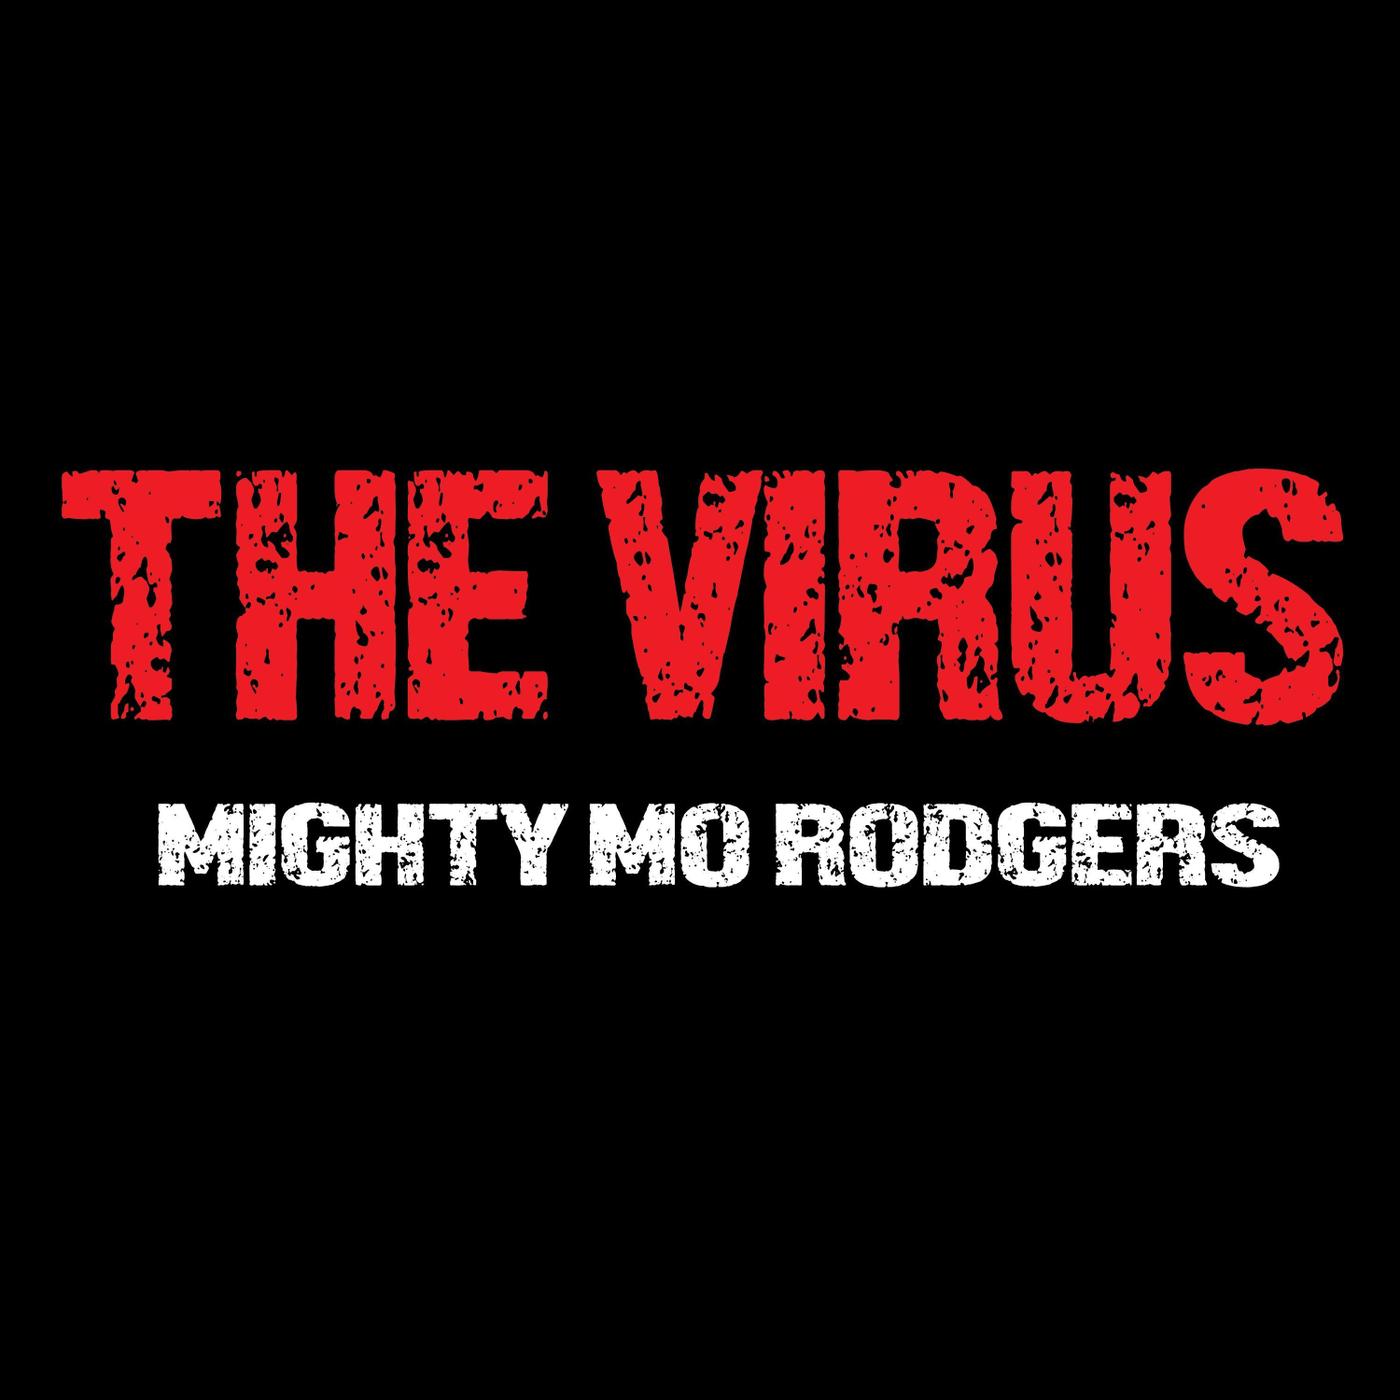 Mighty Mo Rodgers - 400 Years of Tears (feat. The Starlights)